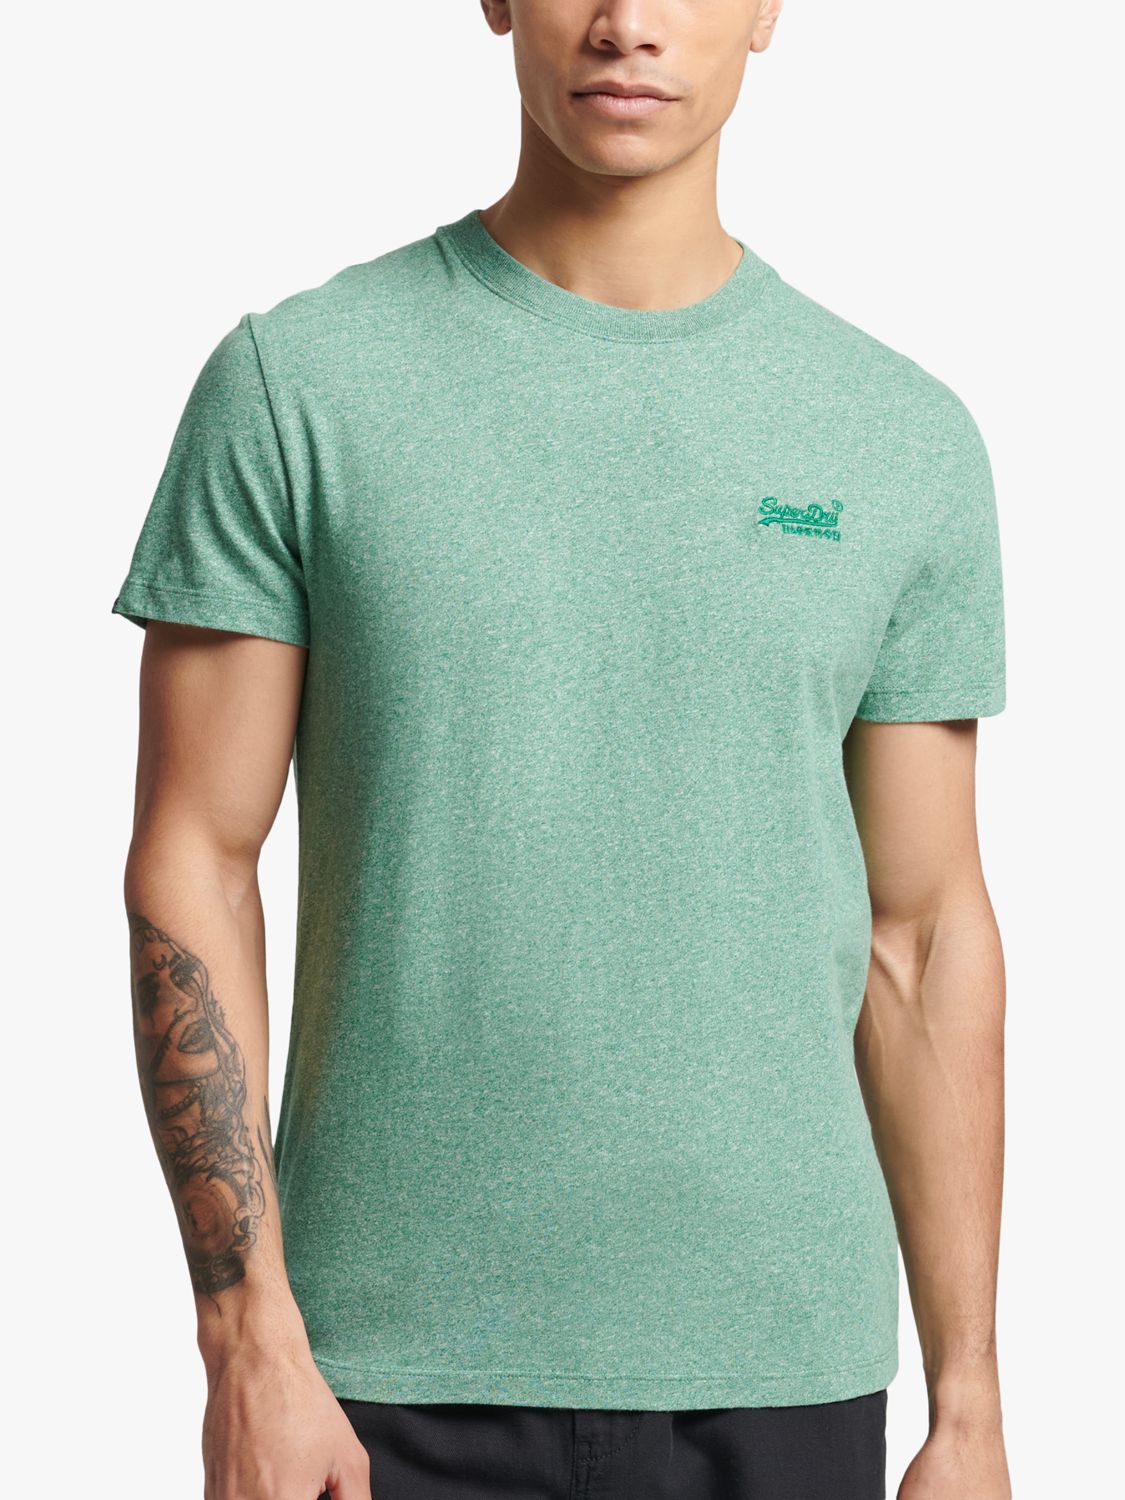 Superdry Organic & Lewis T-Shirt, Grit Bright Vintage Cotton at Embroidered Partners John Logo Green